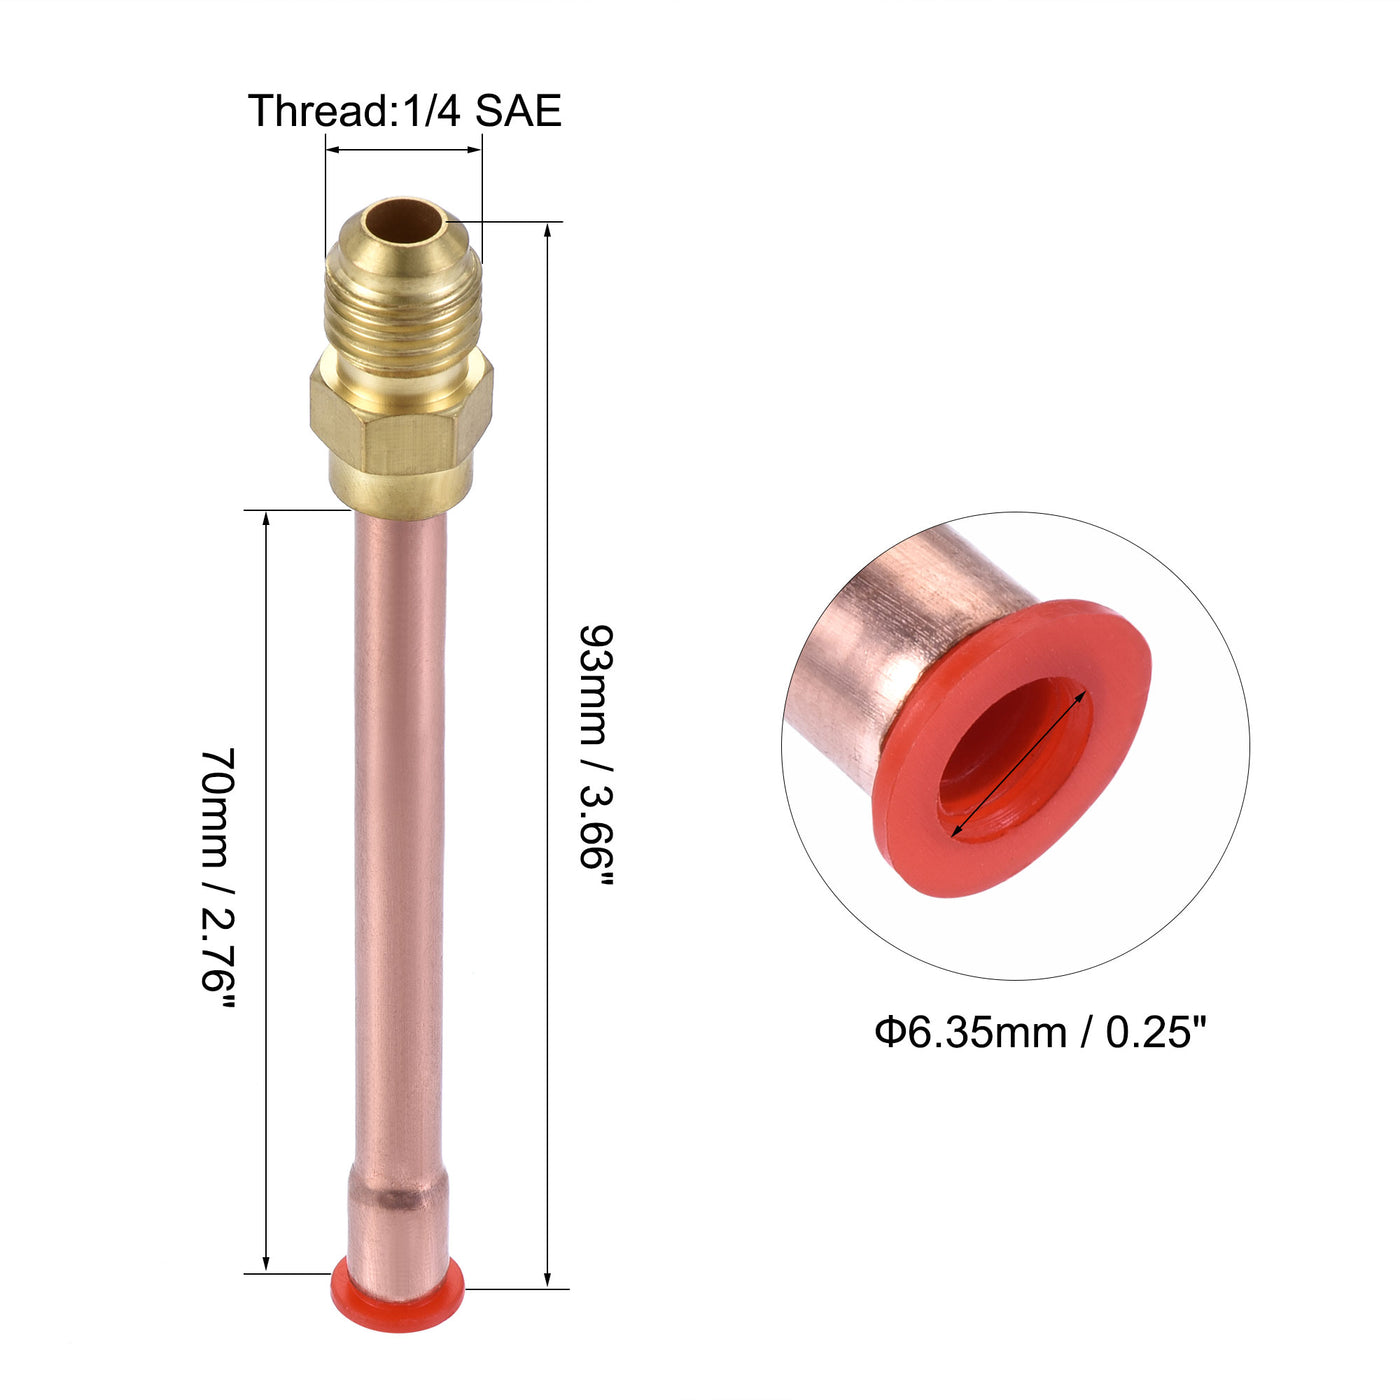 Uxcell Uxcell Brass Pipe Fitting, 1/2 SAE Flare Connector Male Thread Adapter with Copper Tube for Air Conditioner HVAC System